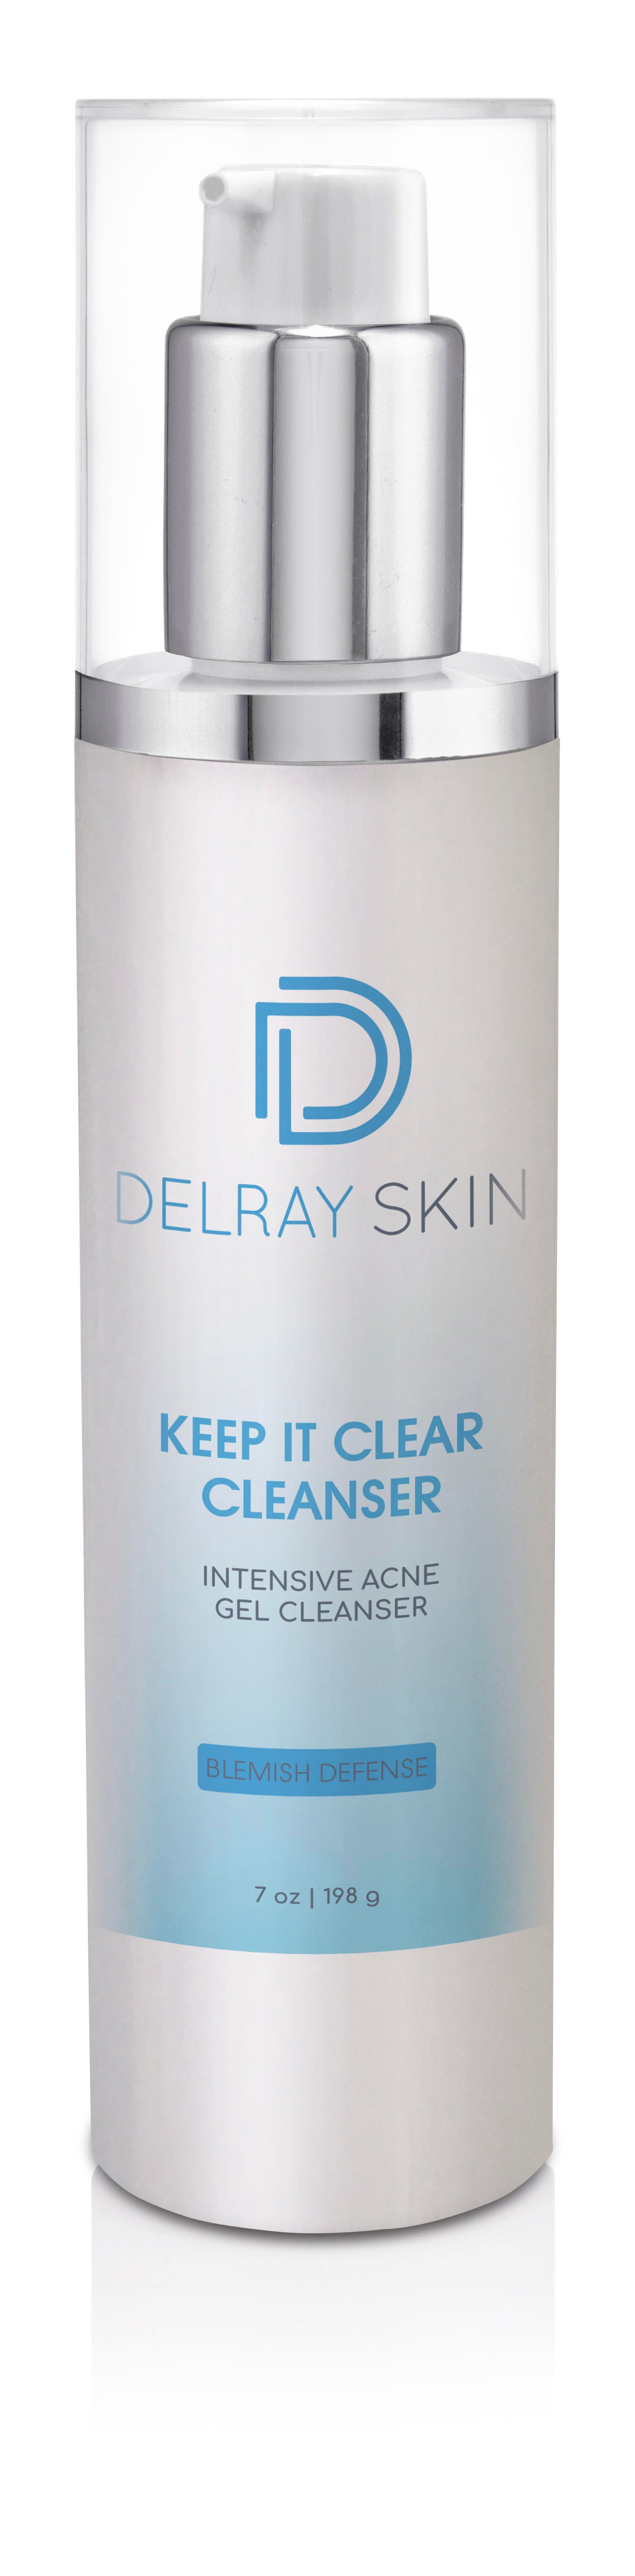 Keep it Clear Cleanser